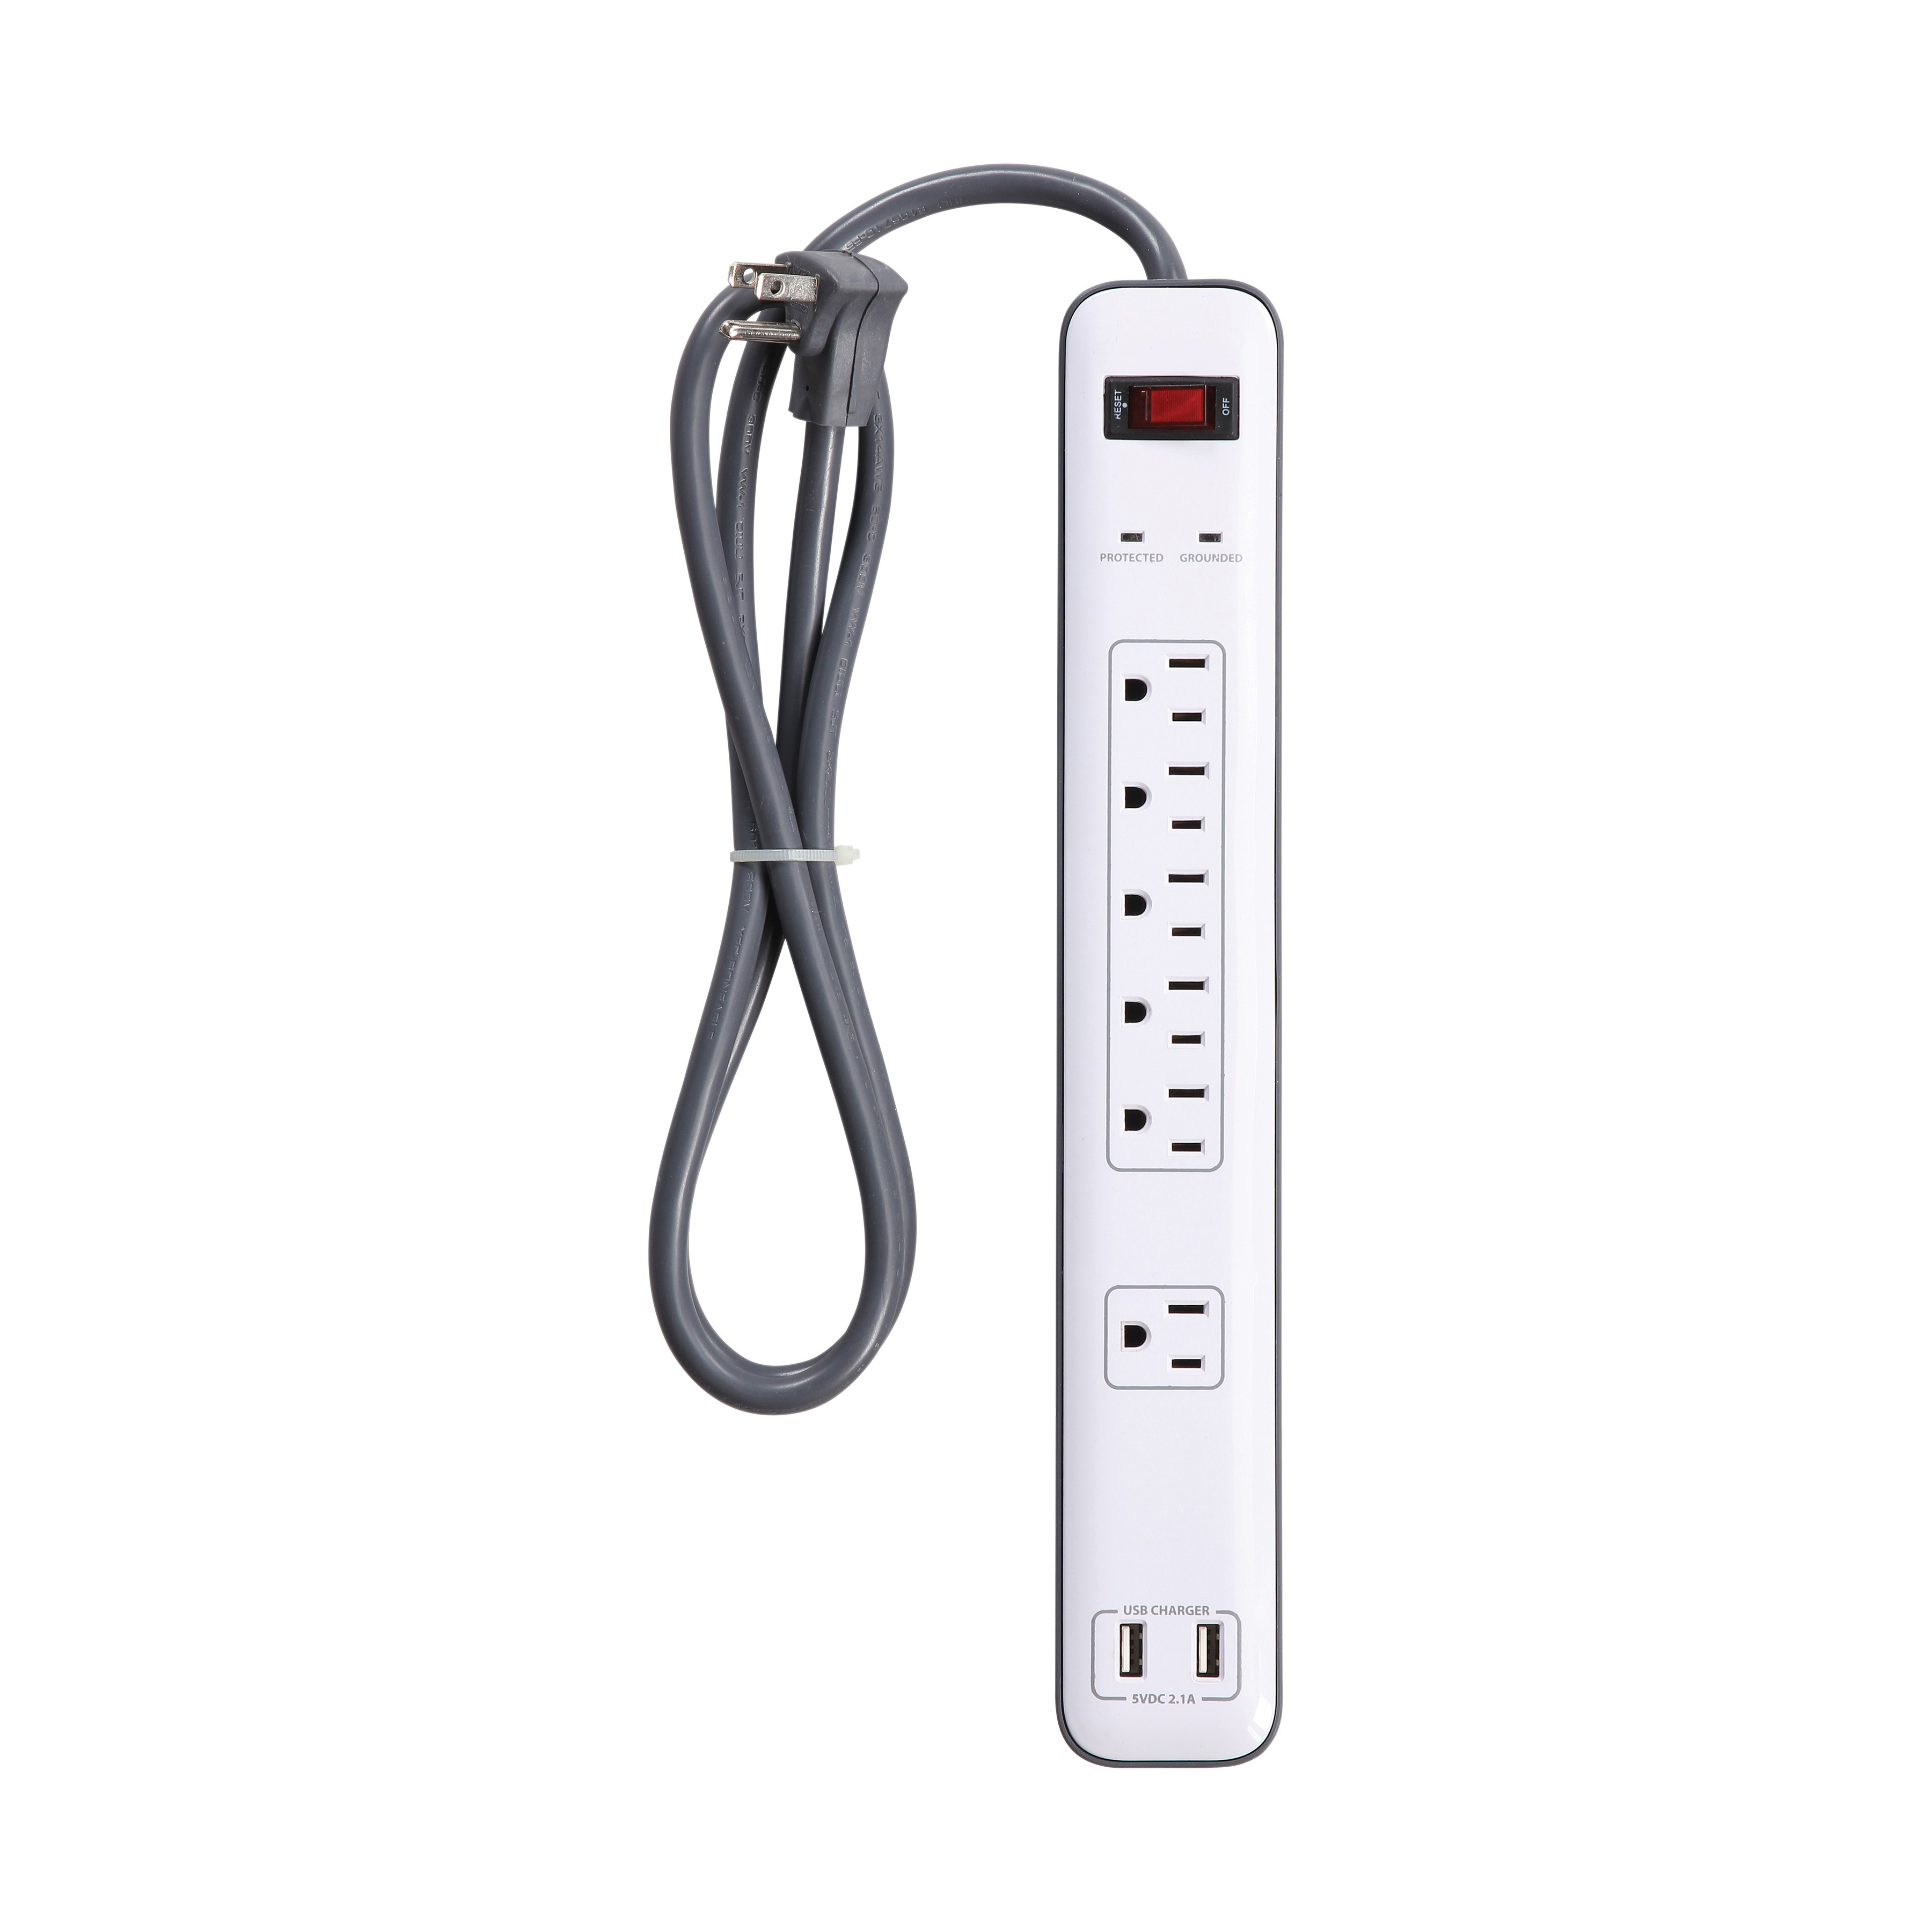 OR525106 Surge Protector Power Strip, 125 V, 15 A, White